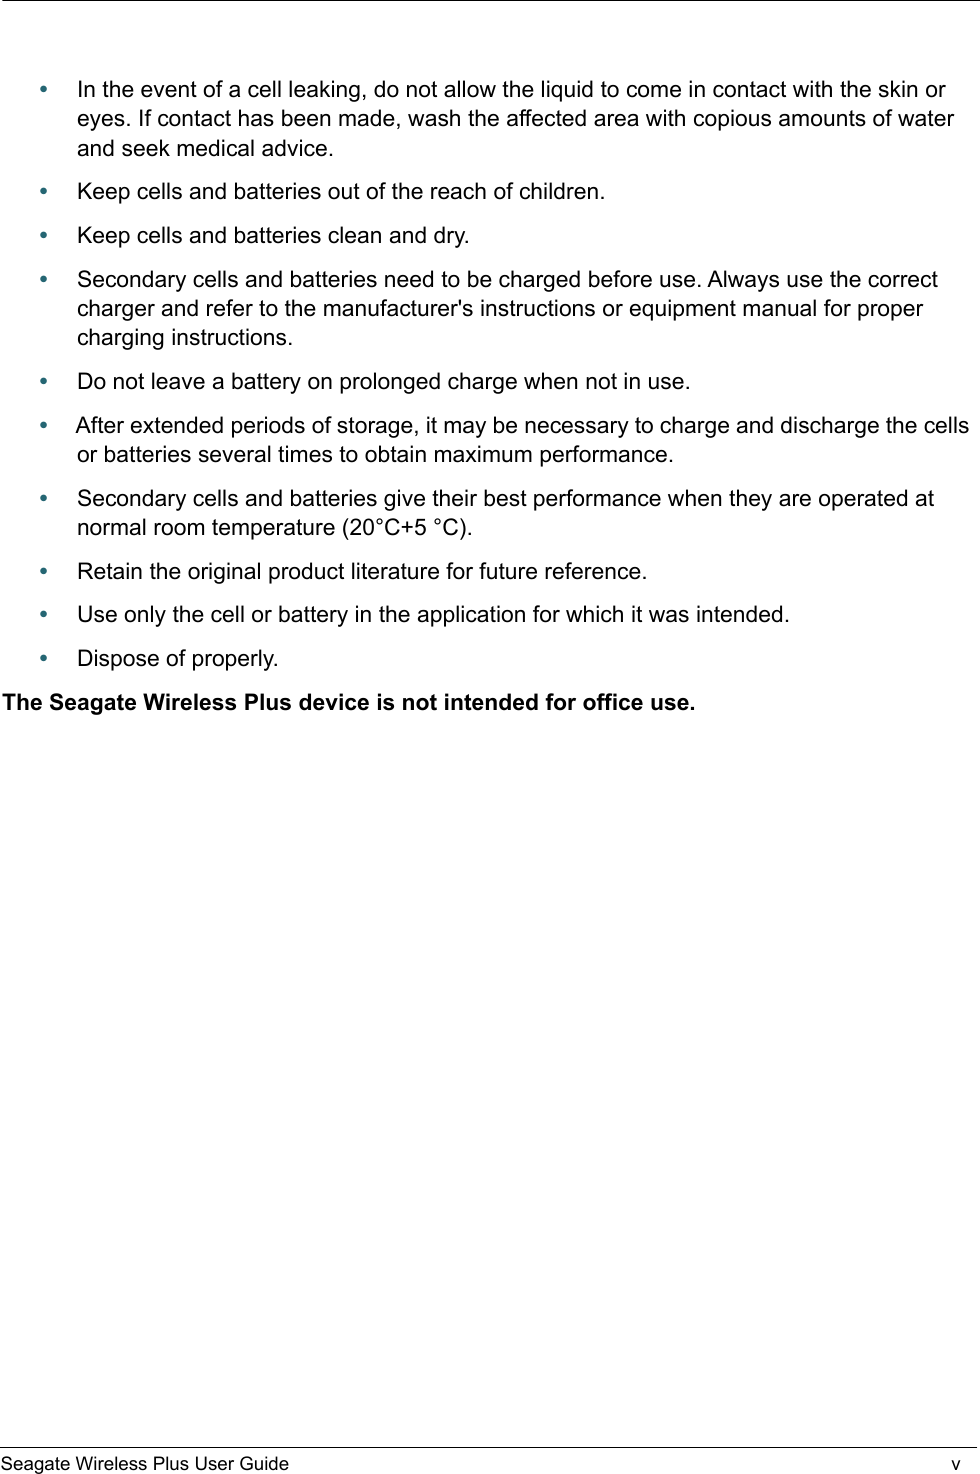    Seagate Wireless Plus User Guide v•In the event of a cell leaking, do not allow the liquid to come in contact with the skin or eyes. If contact has been made, wash the affected area with copious amounts of water and seek medical advice.•Keep cells and batteries out of the reach of children.•Keep cells and batteries clean and dry.•Secondary cells and batteries need to be charged before use. Always use the correct charger and refer to the manufacturer&apos;s instructions or equipment manual for proper charging instructions.•Do not leave a battery on prolonged charge when not in use.•After extended periods of storage, it may be necessary to charge and discharge the cells or batteries several times to obtain maximum performance.•Secondary cells and batteries give their best performance when they are operated at normal room temperature (20°C+5 °C).•Retain the original product literature for future reference.•Use only the cell or battery in the application for which it was intended.•Dispose of properly.The Seagate Wireless Plus device is not intended for office use.